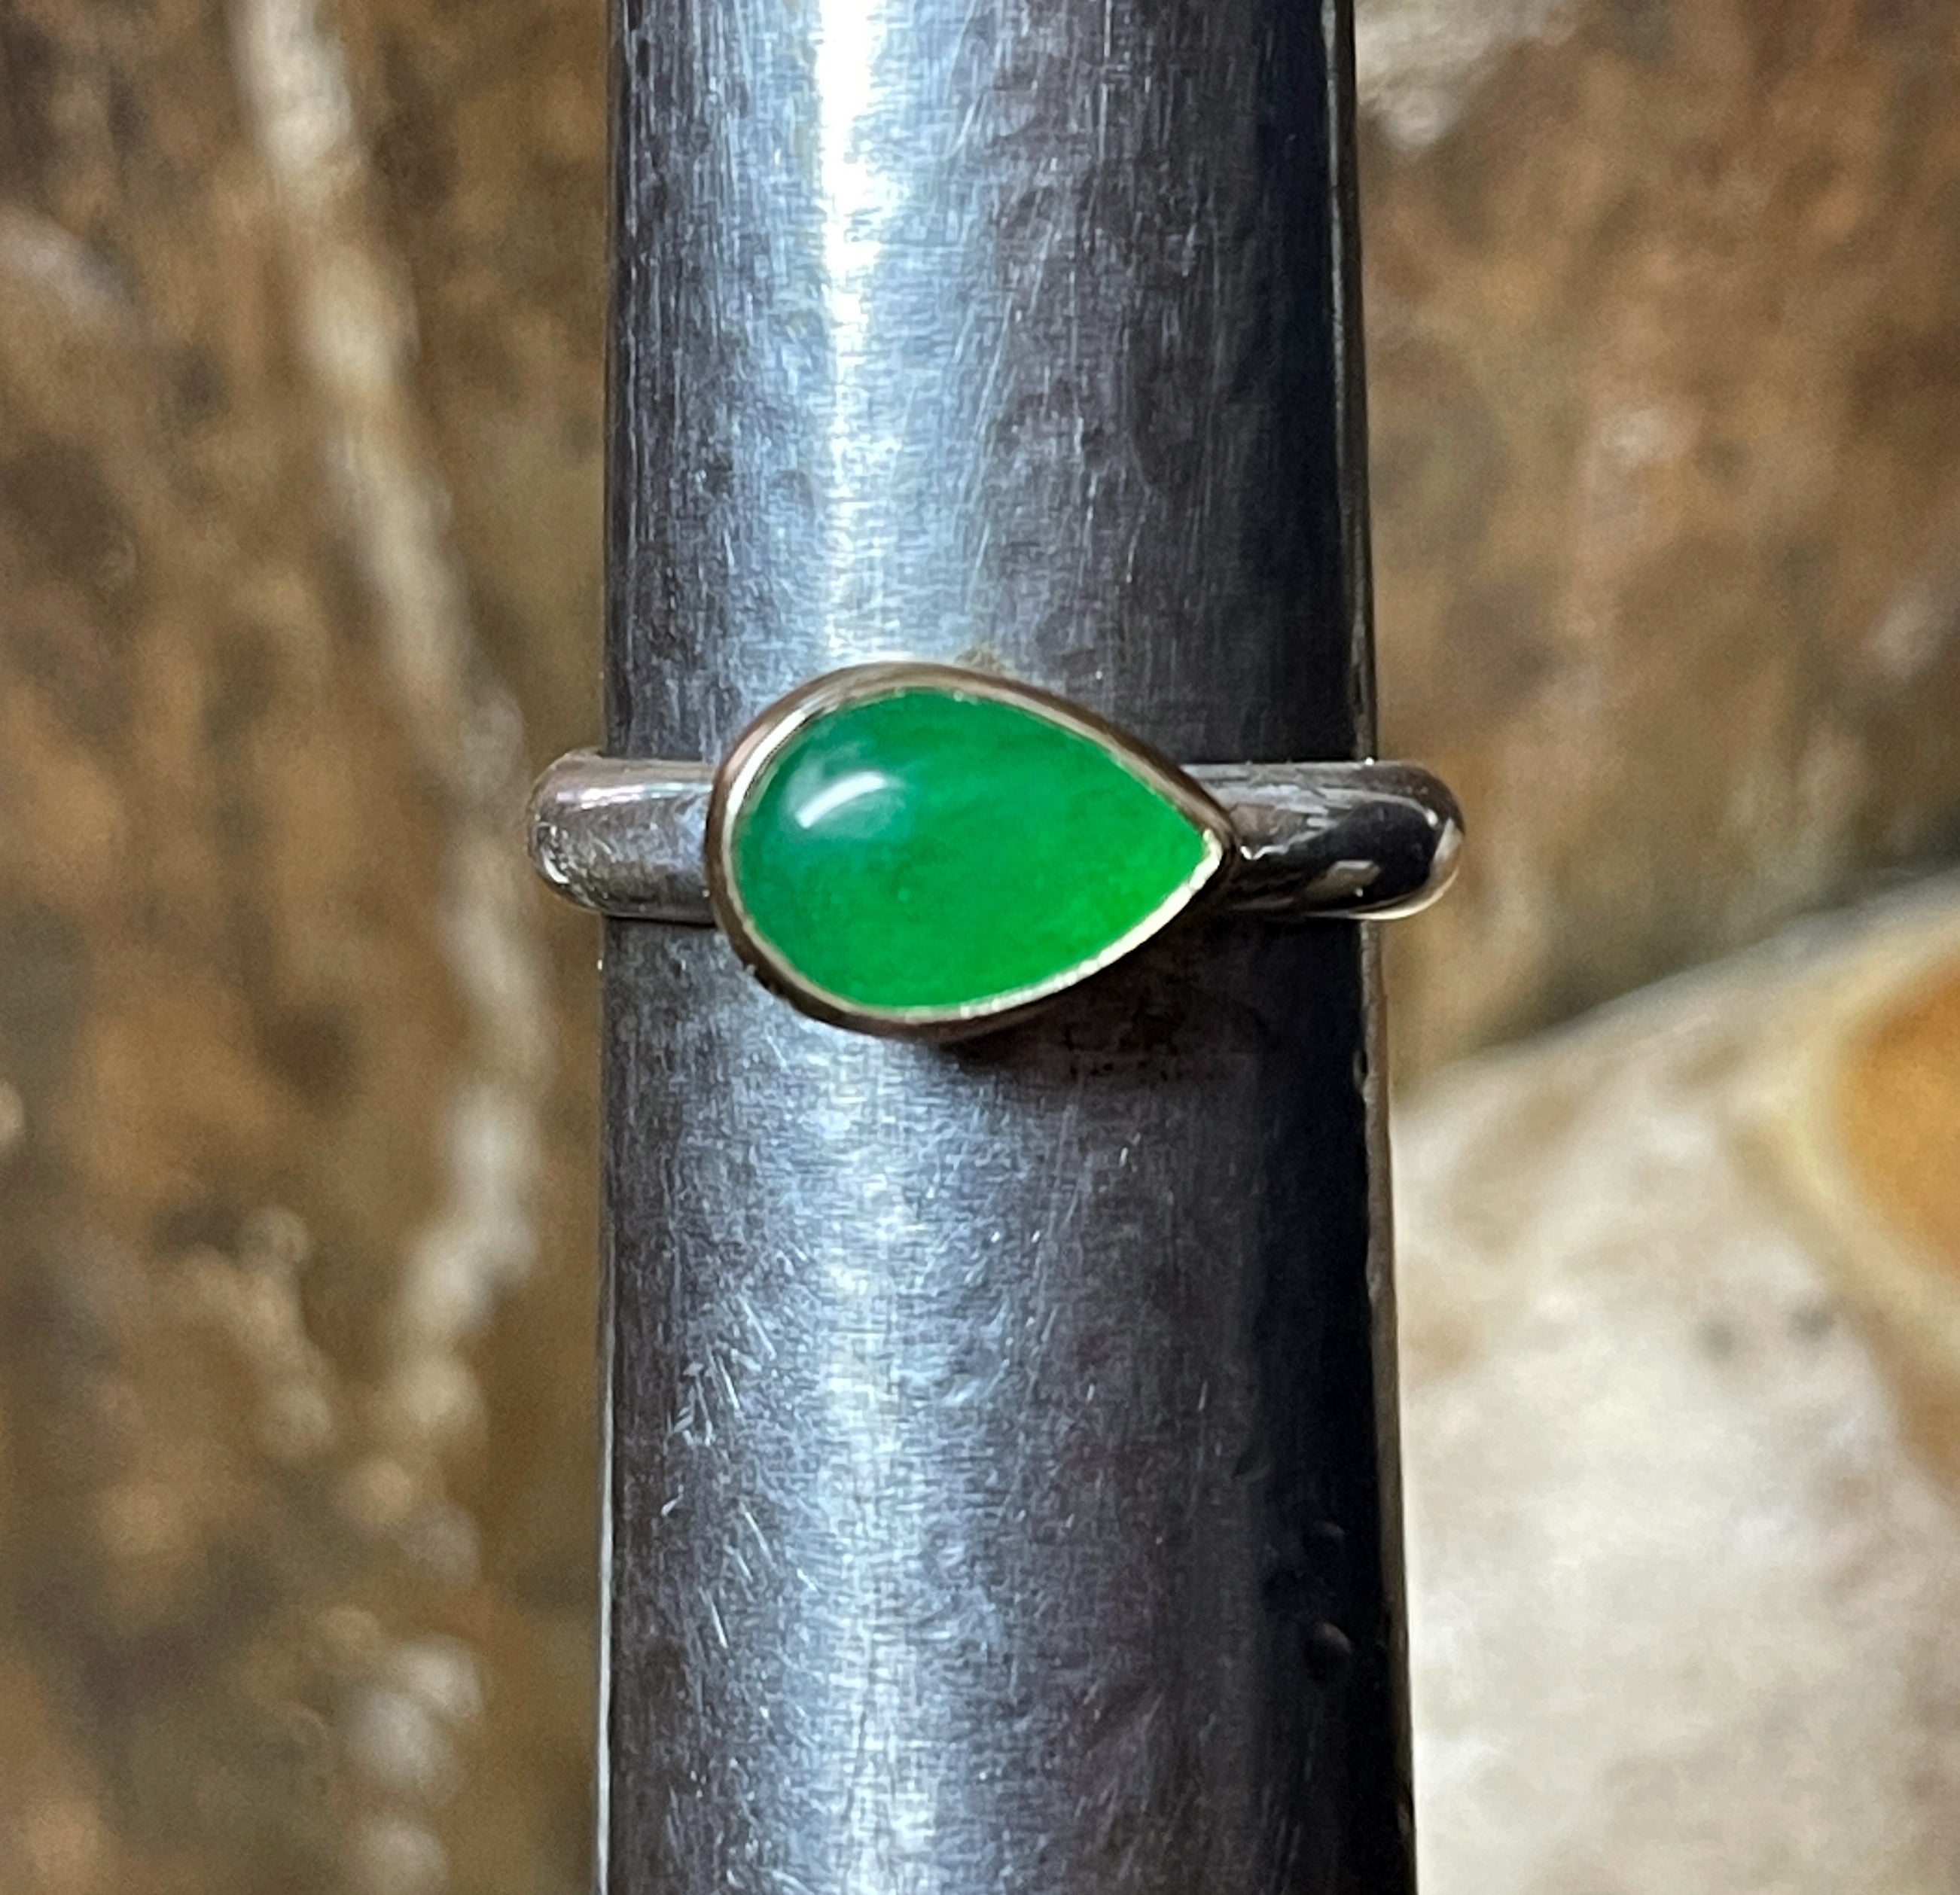 Jade Ring, Imperial Jadeite Ring in 14k Gold and Sterling Silver, Emerald Green Jade Stacking Ring, Type A Jade Ring, Gift for Her